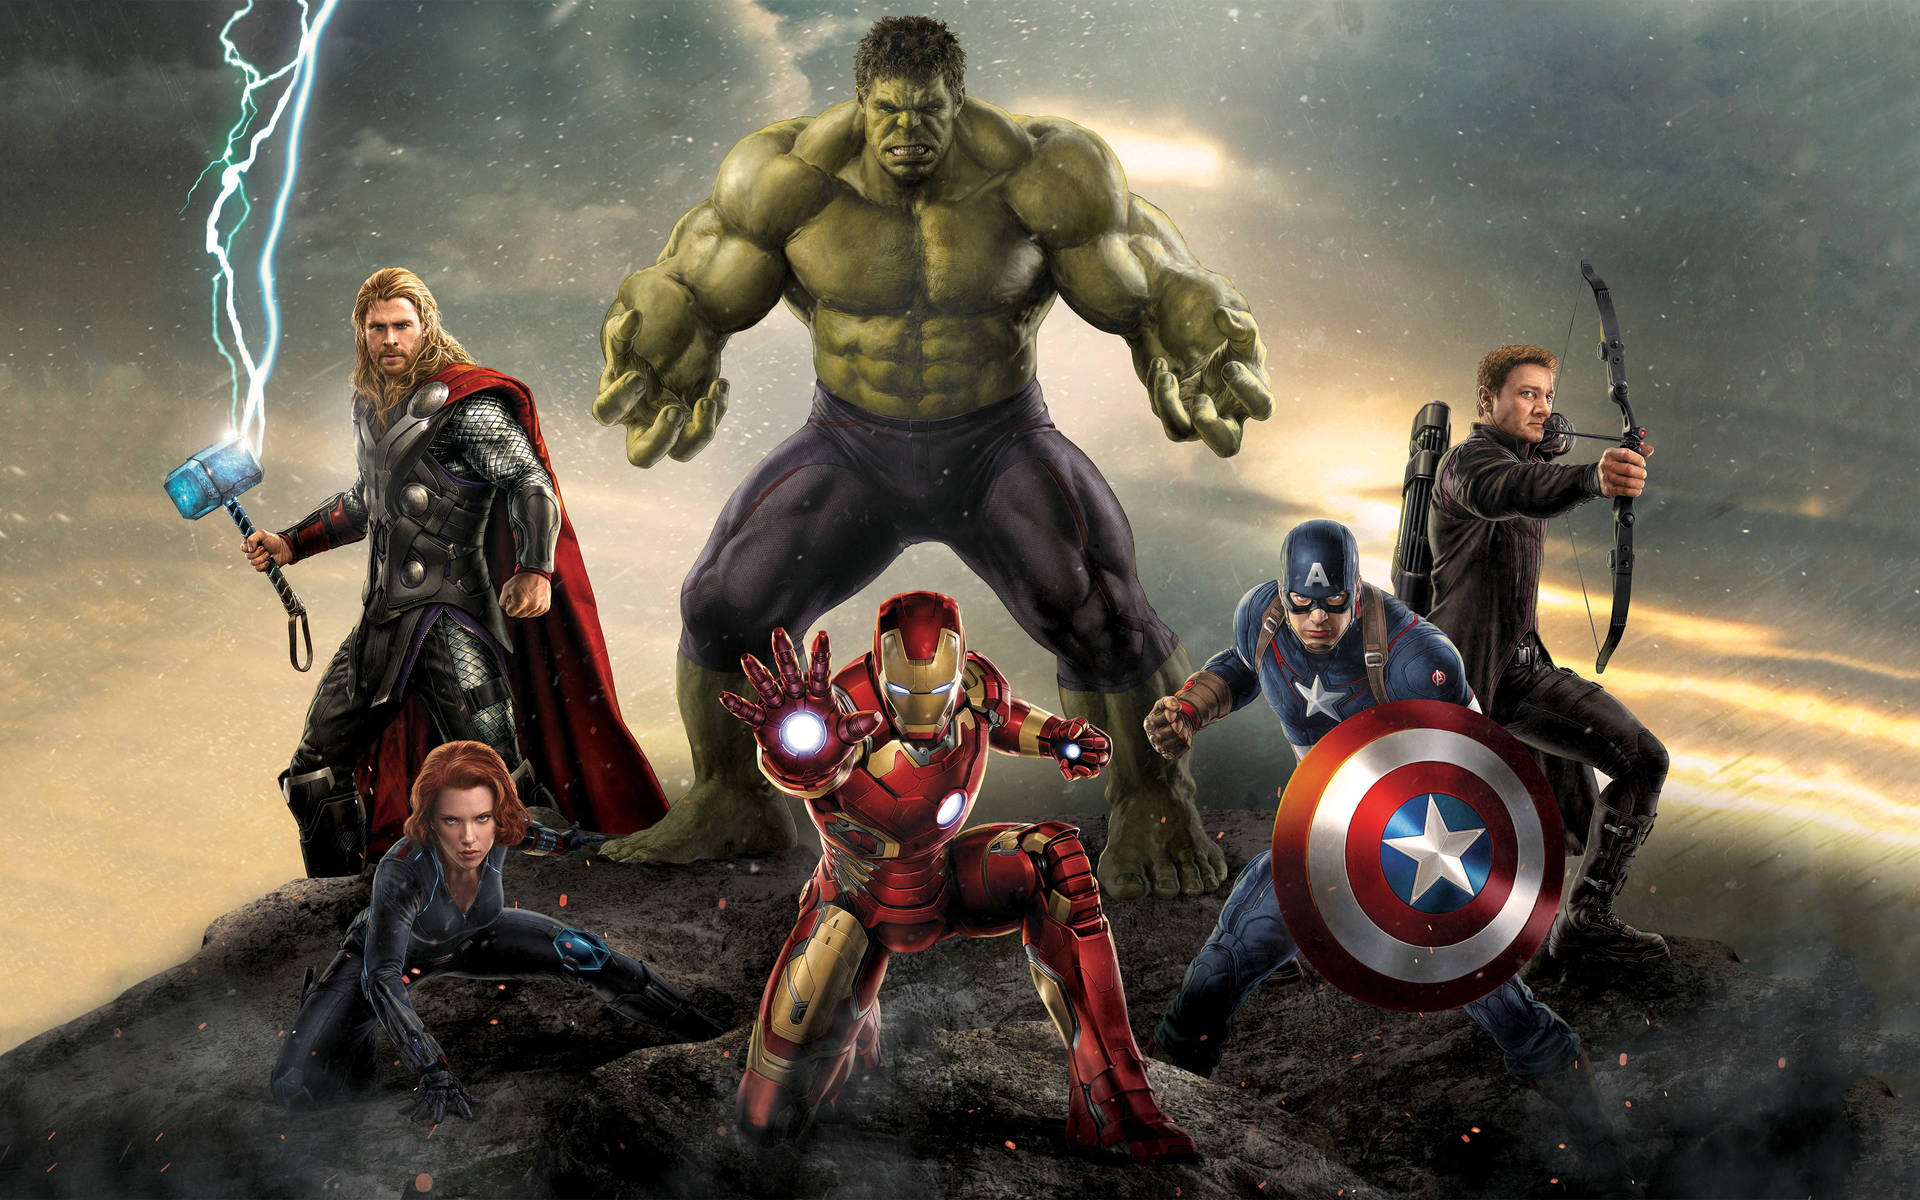 The Marvel Avengers Fighting Stance Background